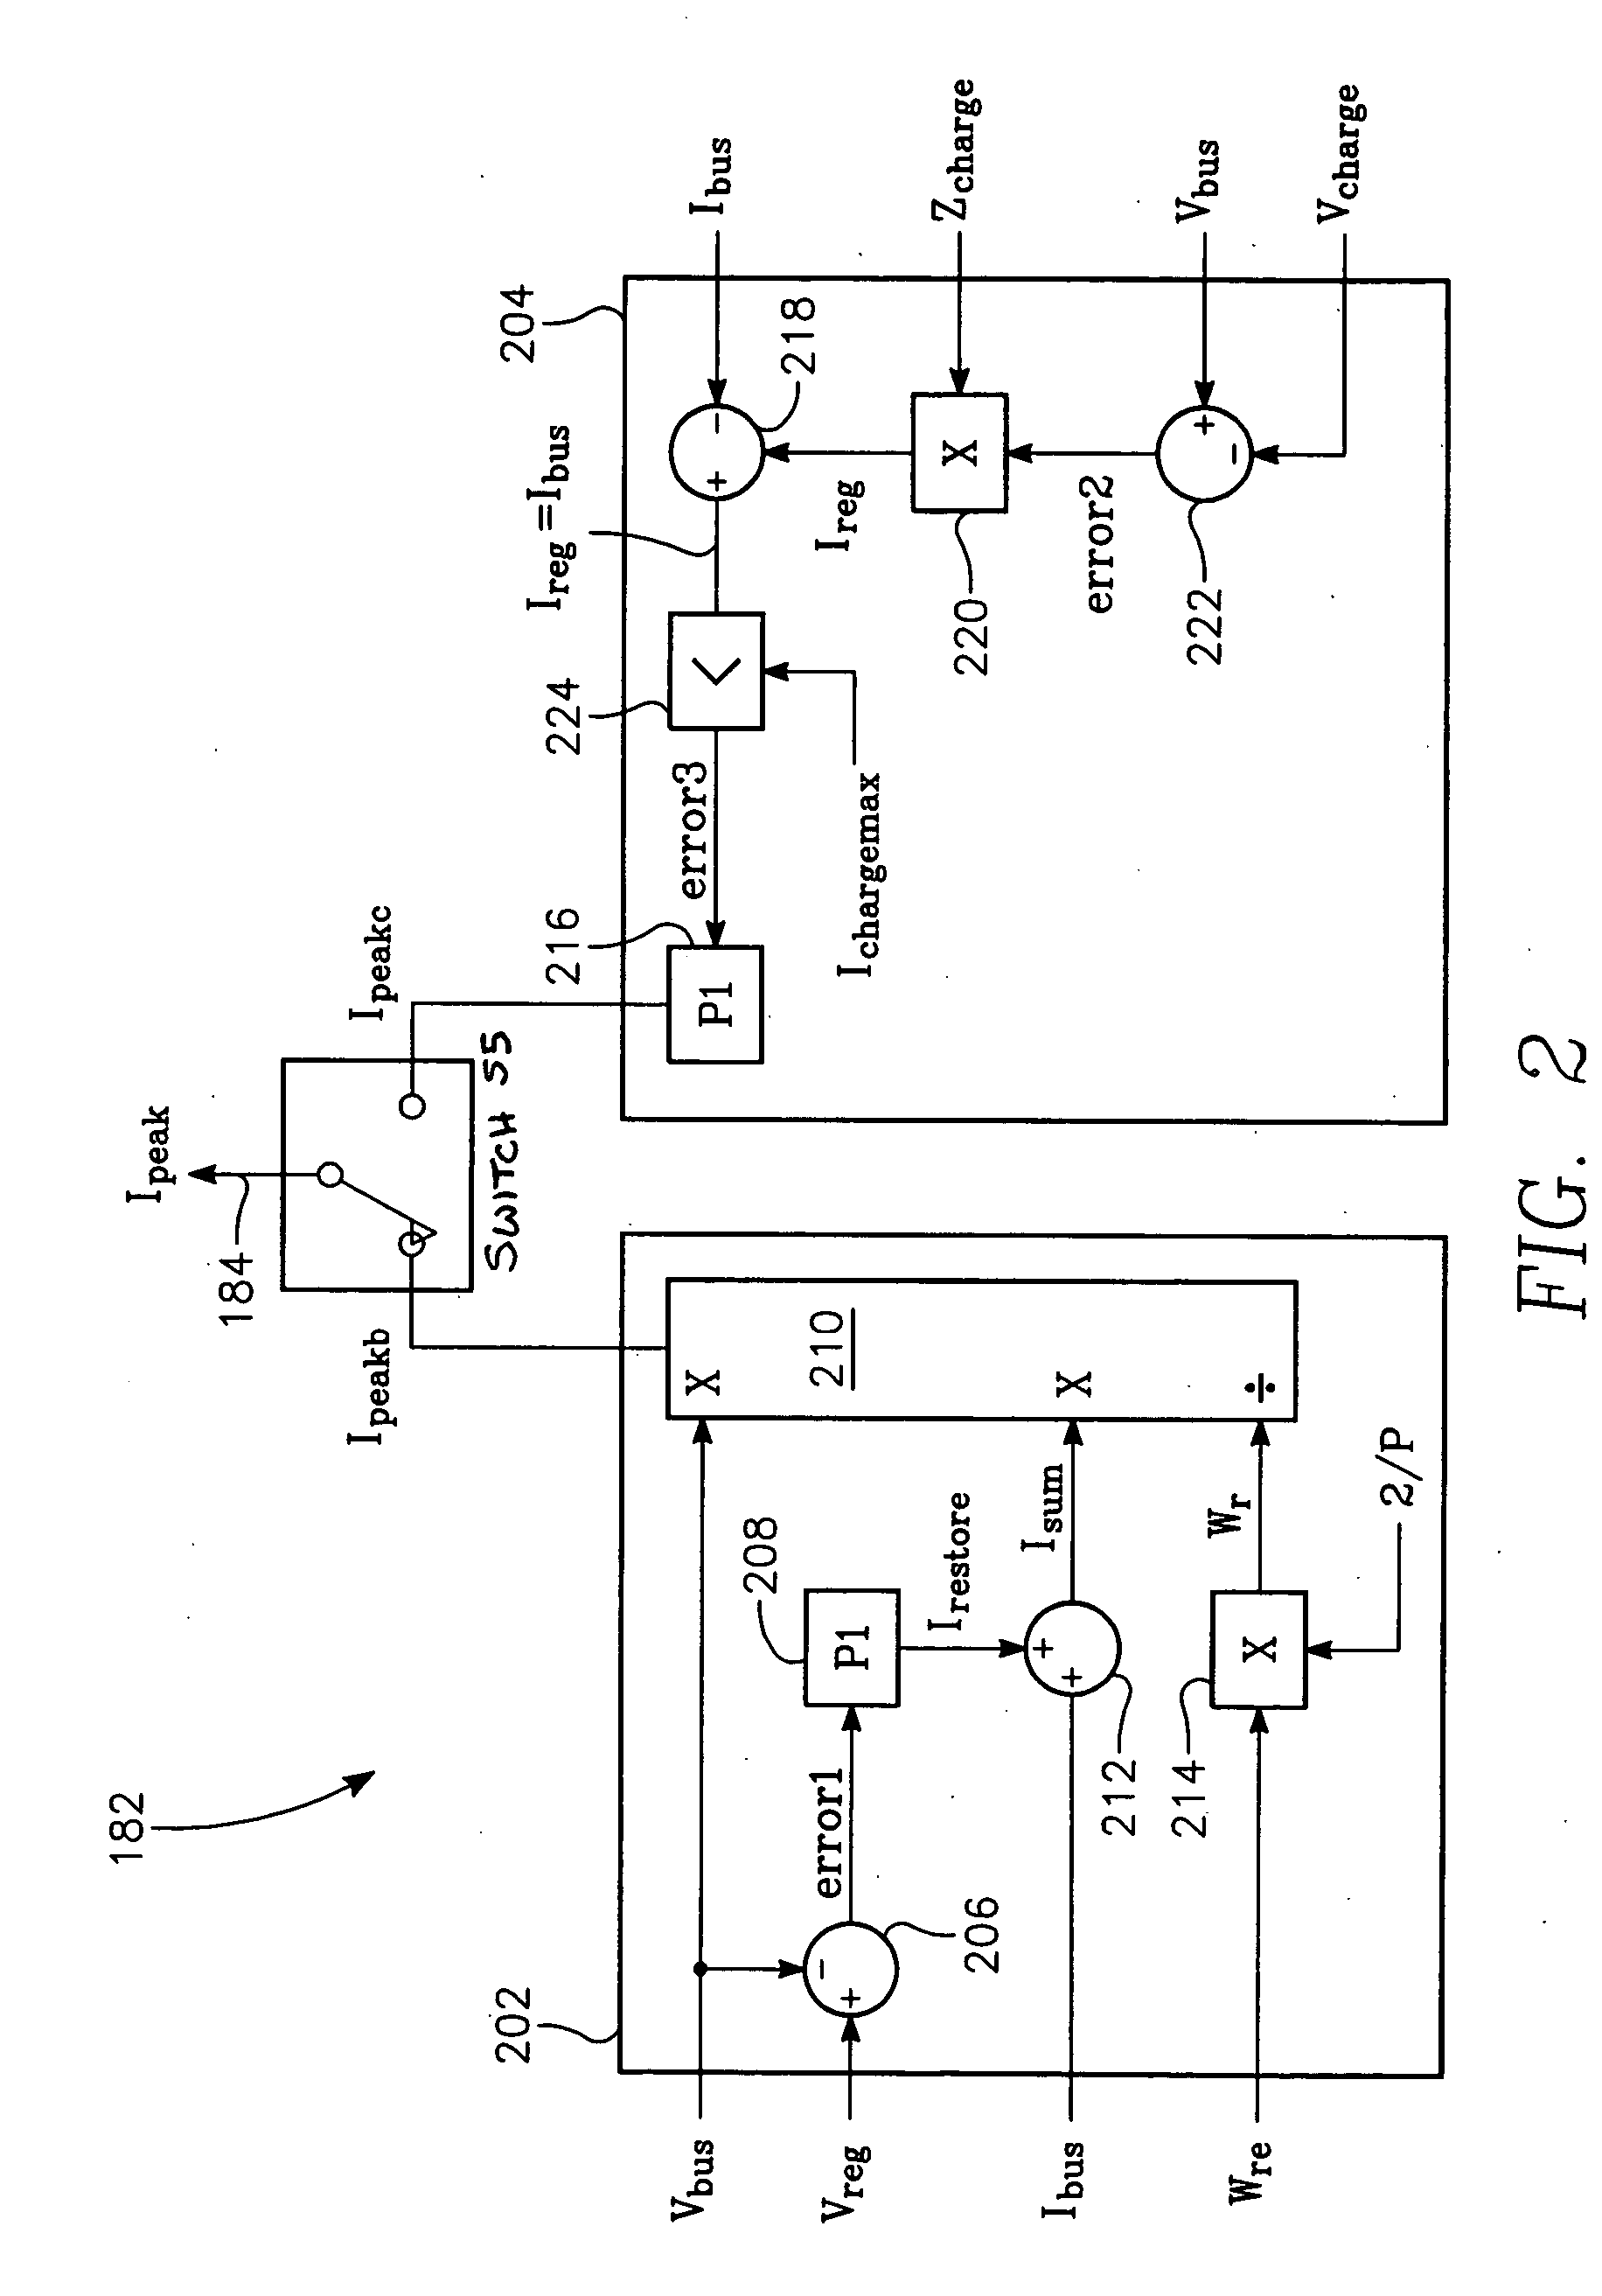 Feedforward controller for synchronous reluctance machines